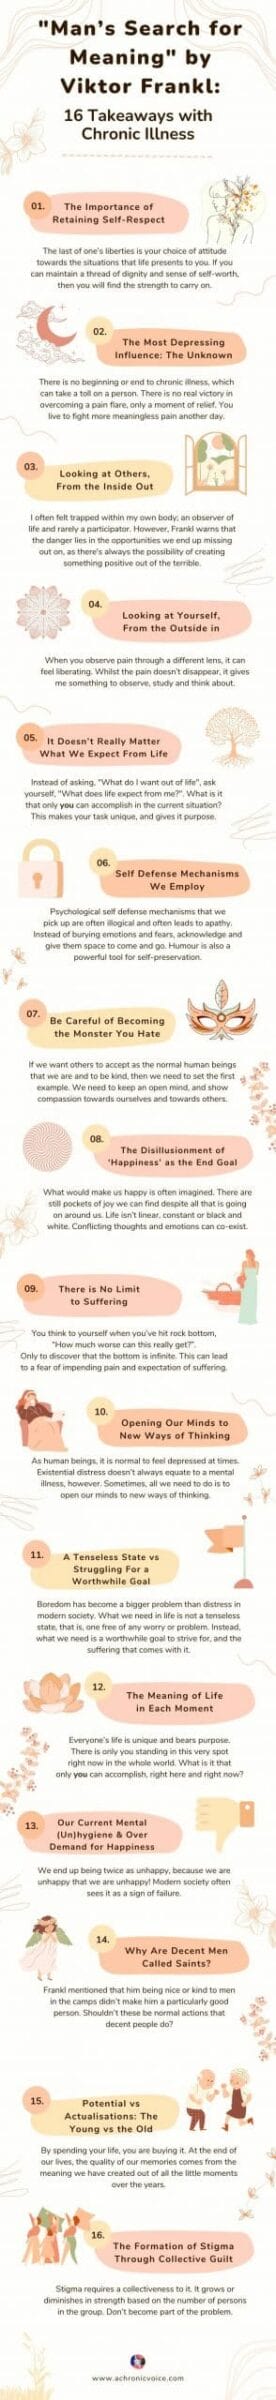 Man's Search for Meaning by Viktor Frankl: 16 Takeaways with Chronic Illness - Infographic